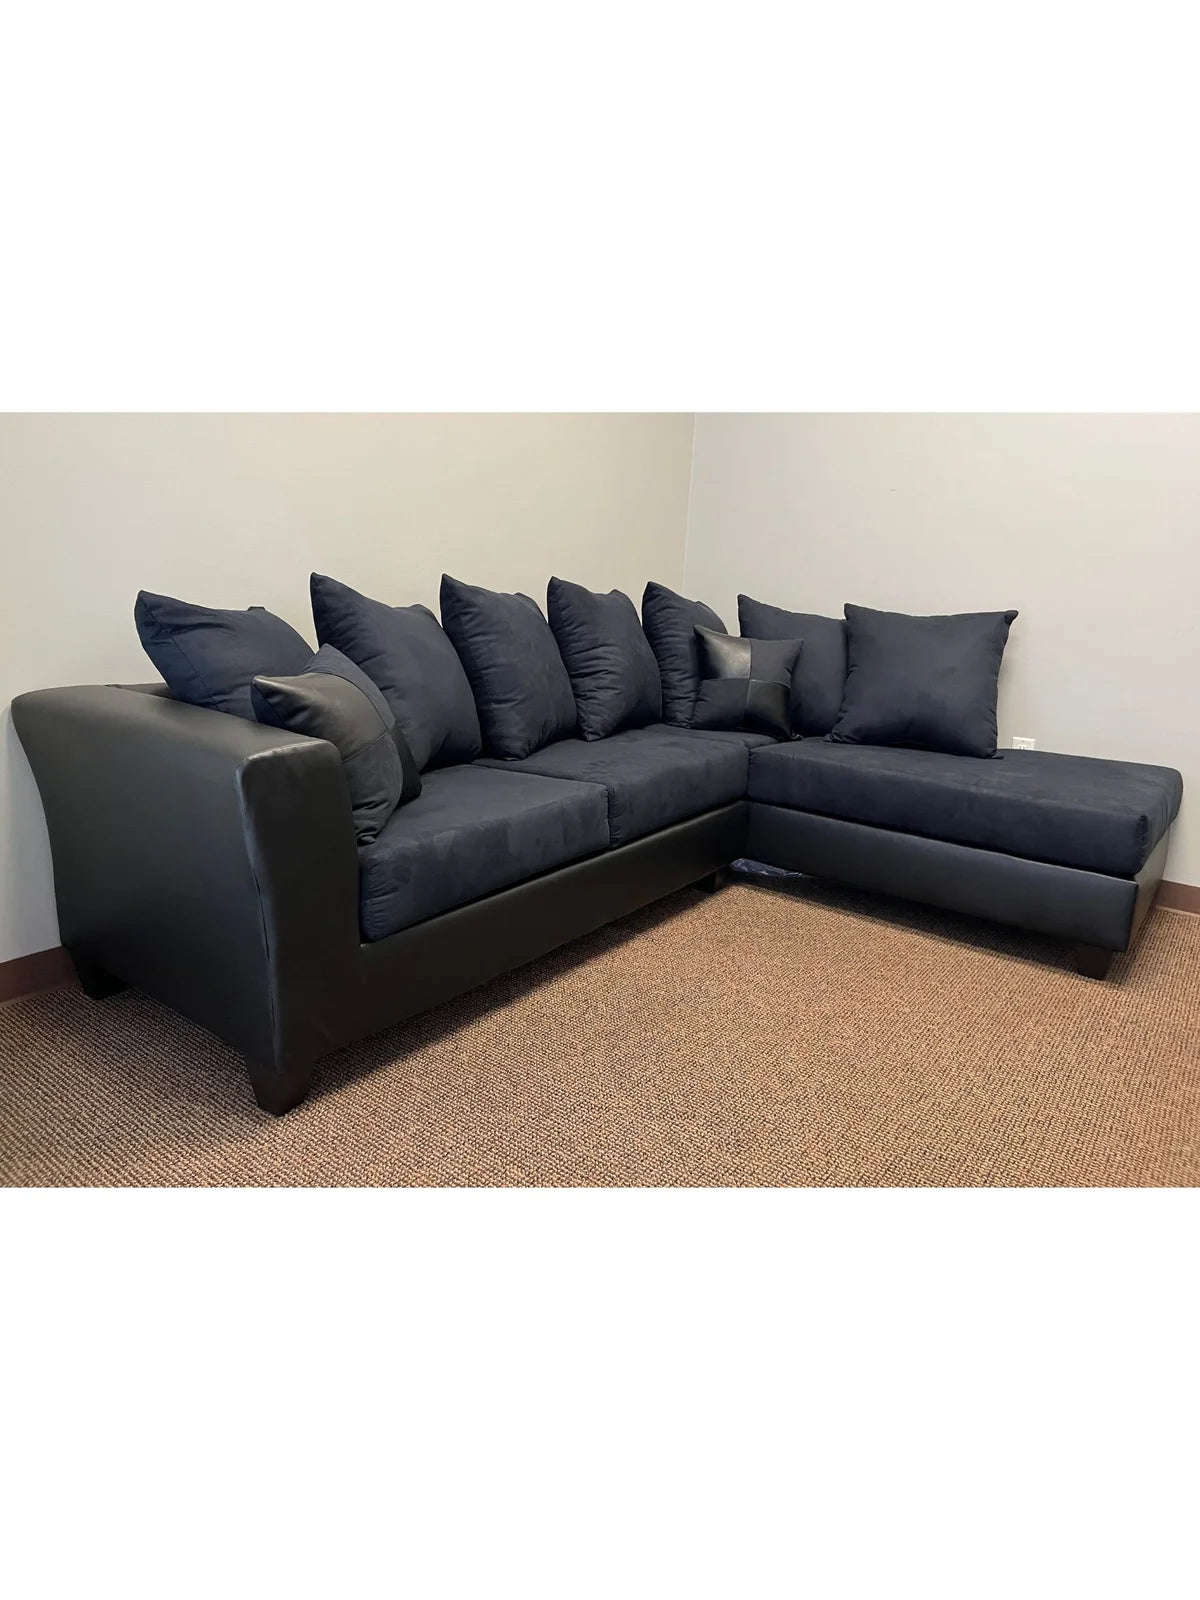 C400 Black/Black (Two Tone) Sectional